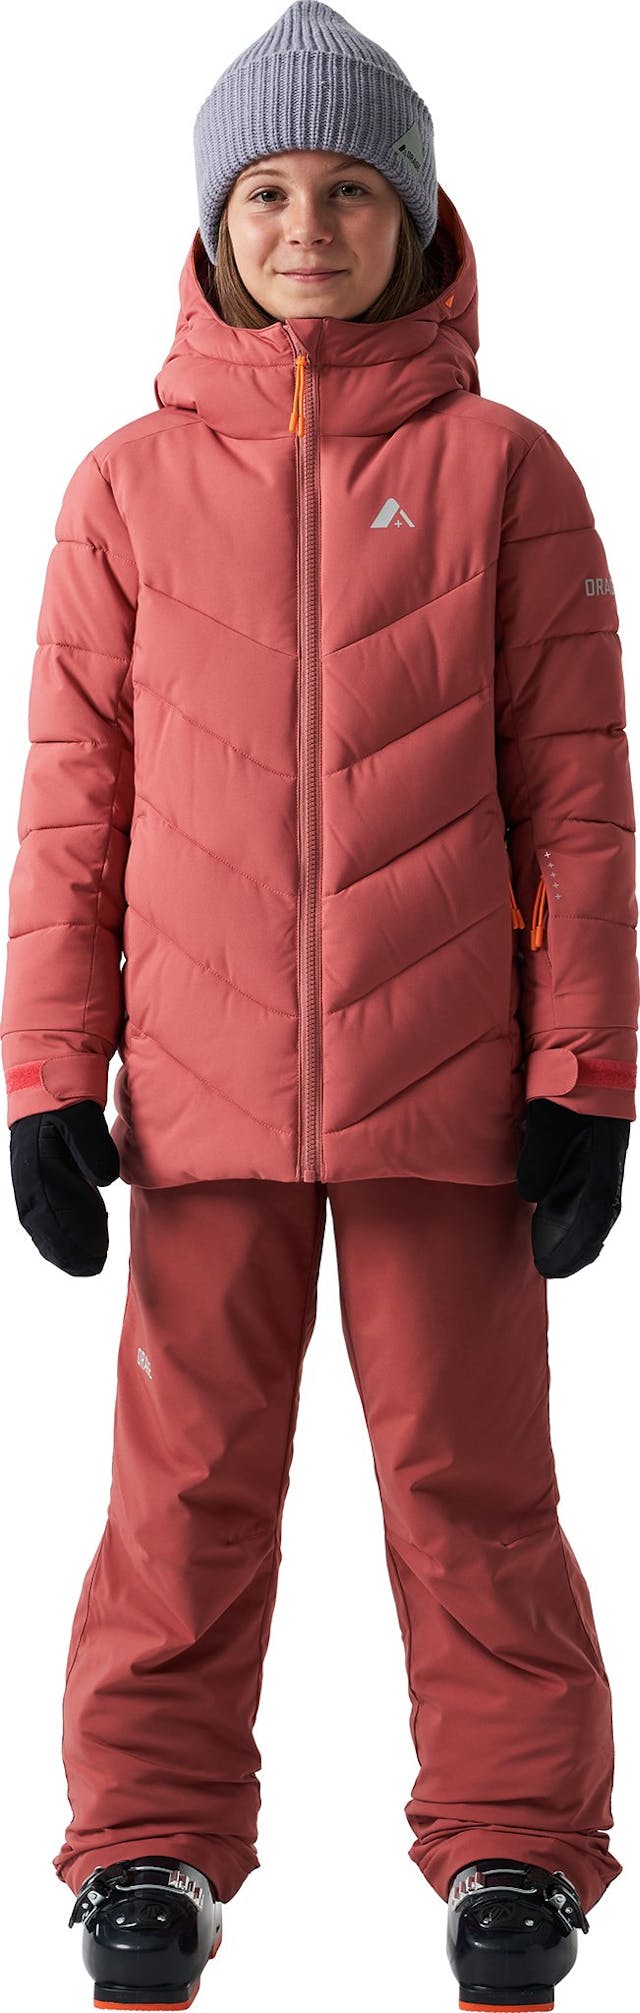 Product image for Riya Synthetic Down Jacket - Girls